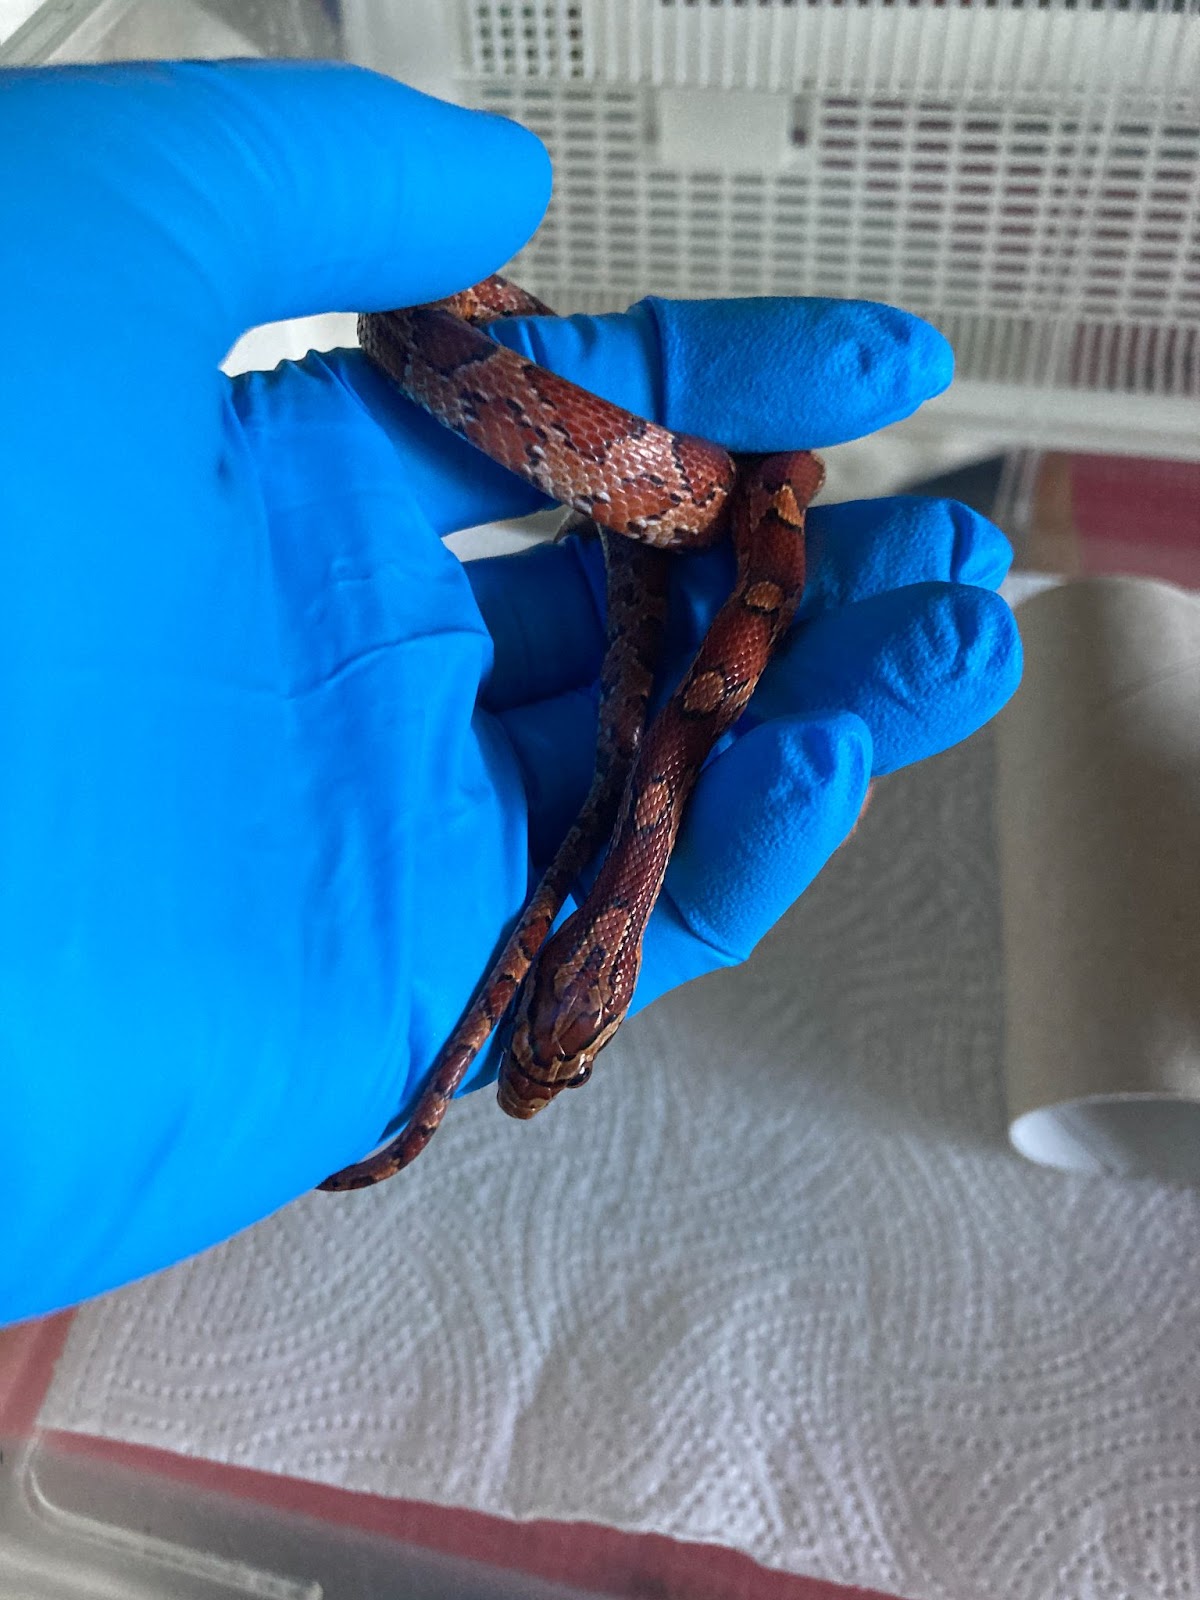 RSPCA appeal for owner of stray corn snake found near Swansea train station